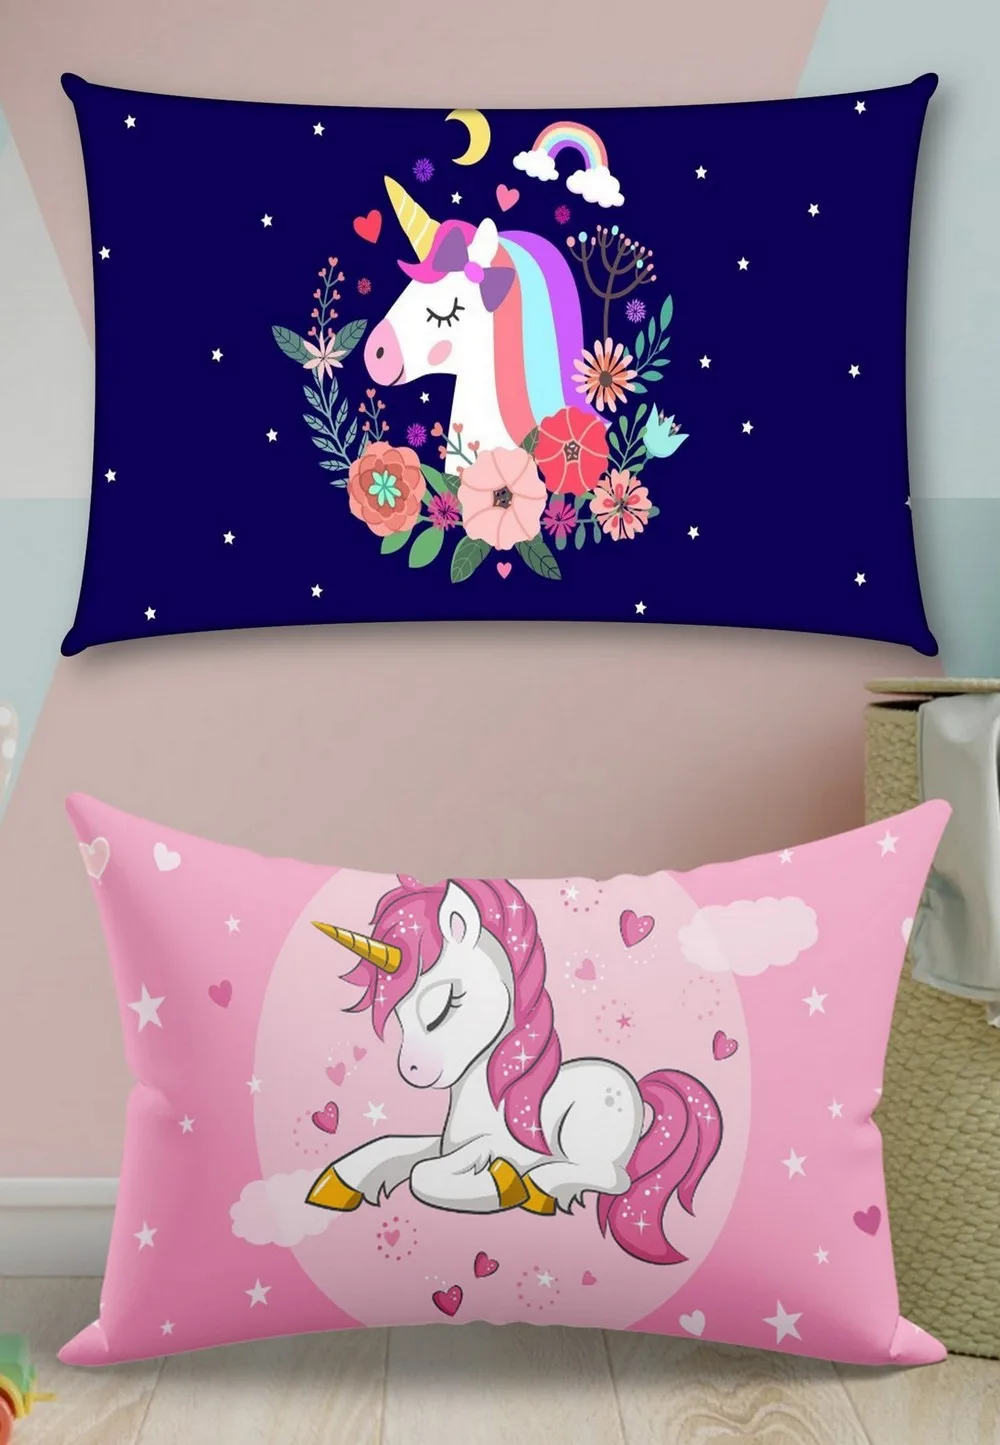 Pink Unicorn Pillow, Blue Unicorn Cover, 18x12 Inches, Set of 2